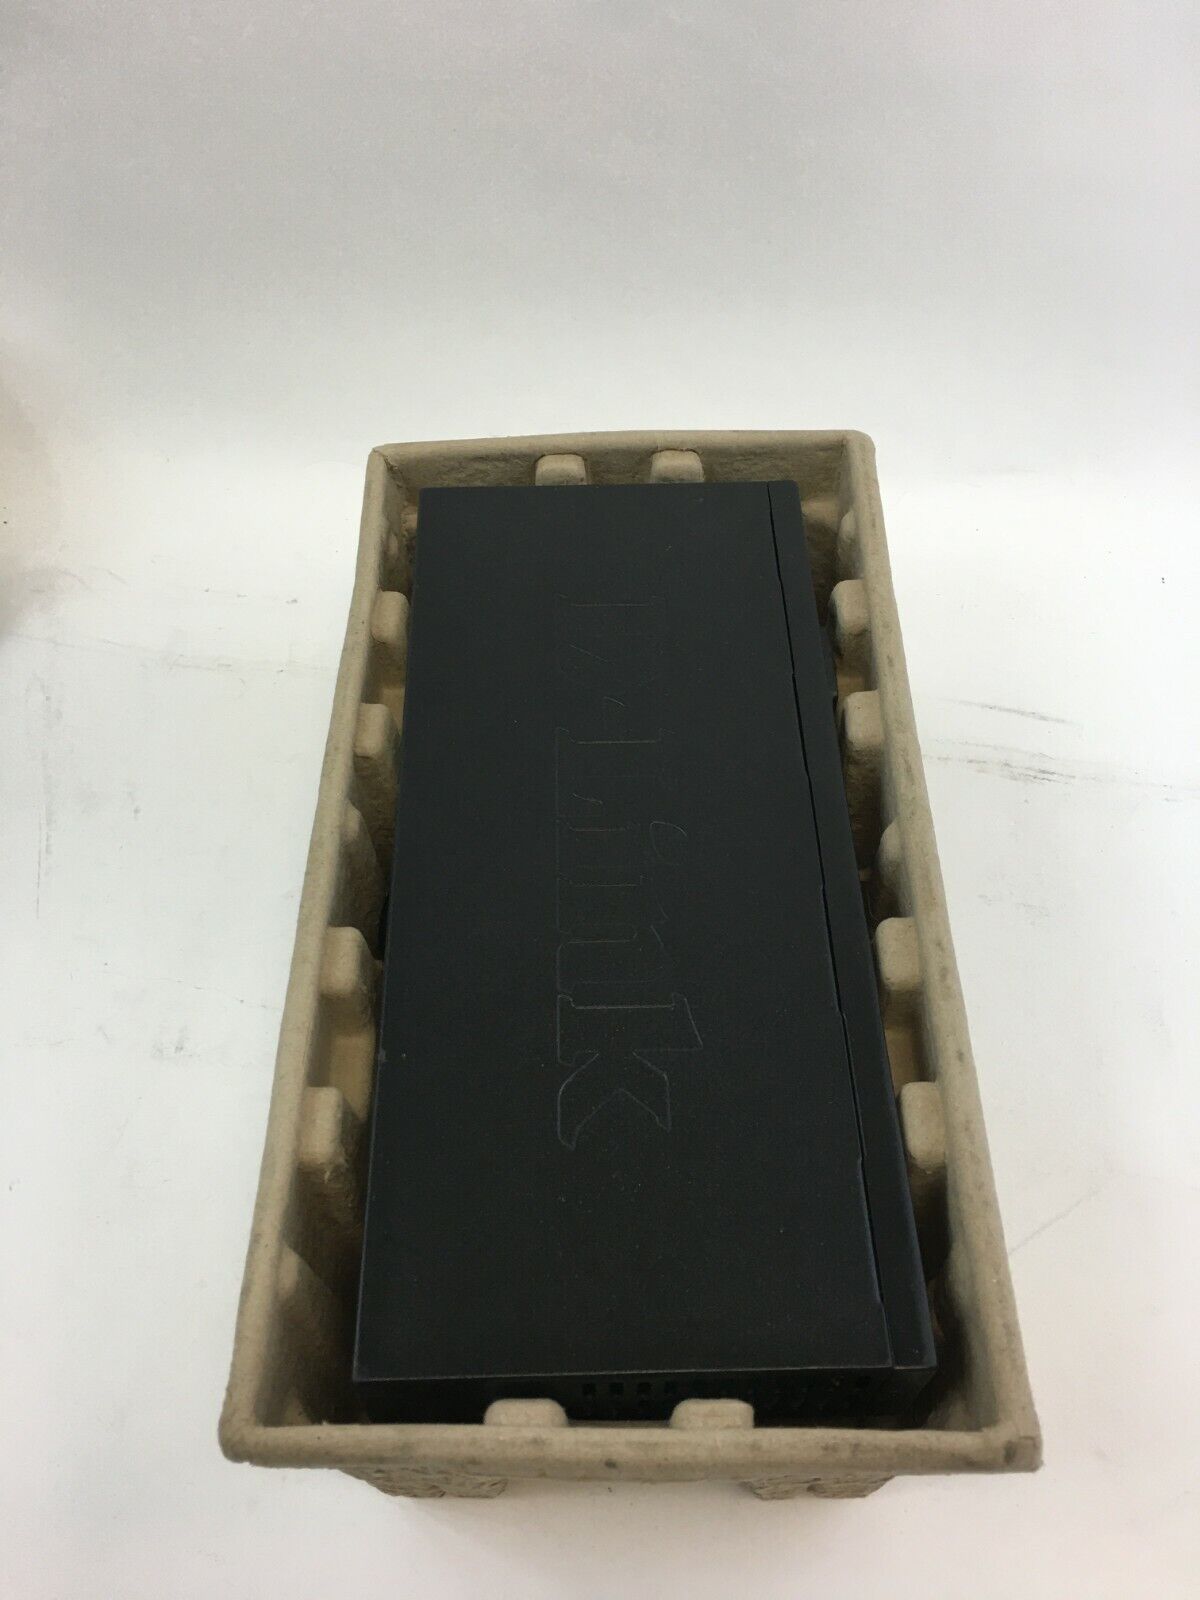 D-Link DGS-1016D 16-Ports Gigabit Ethernet Switch *AS-IS OR FOR PARTS*